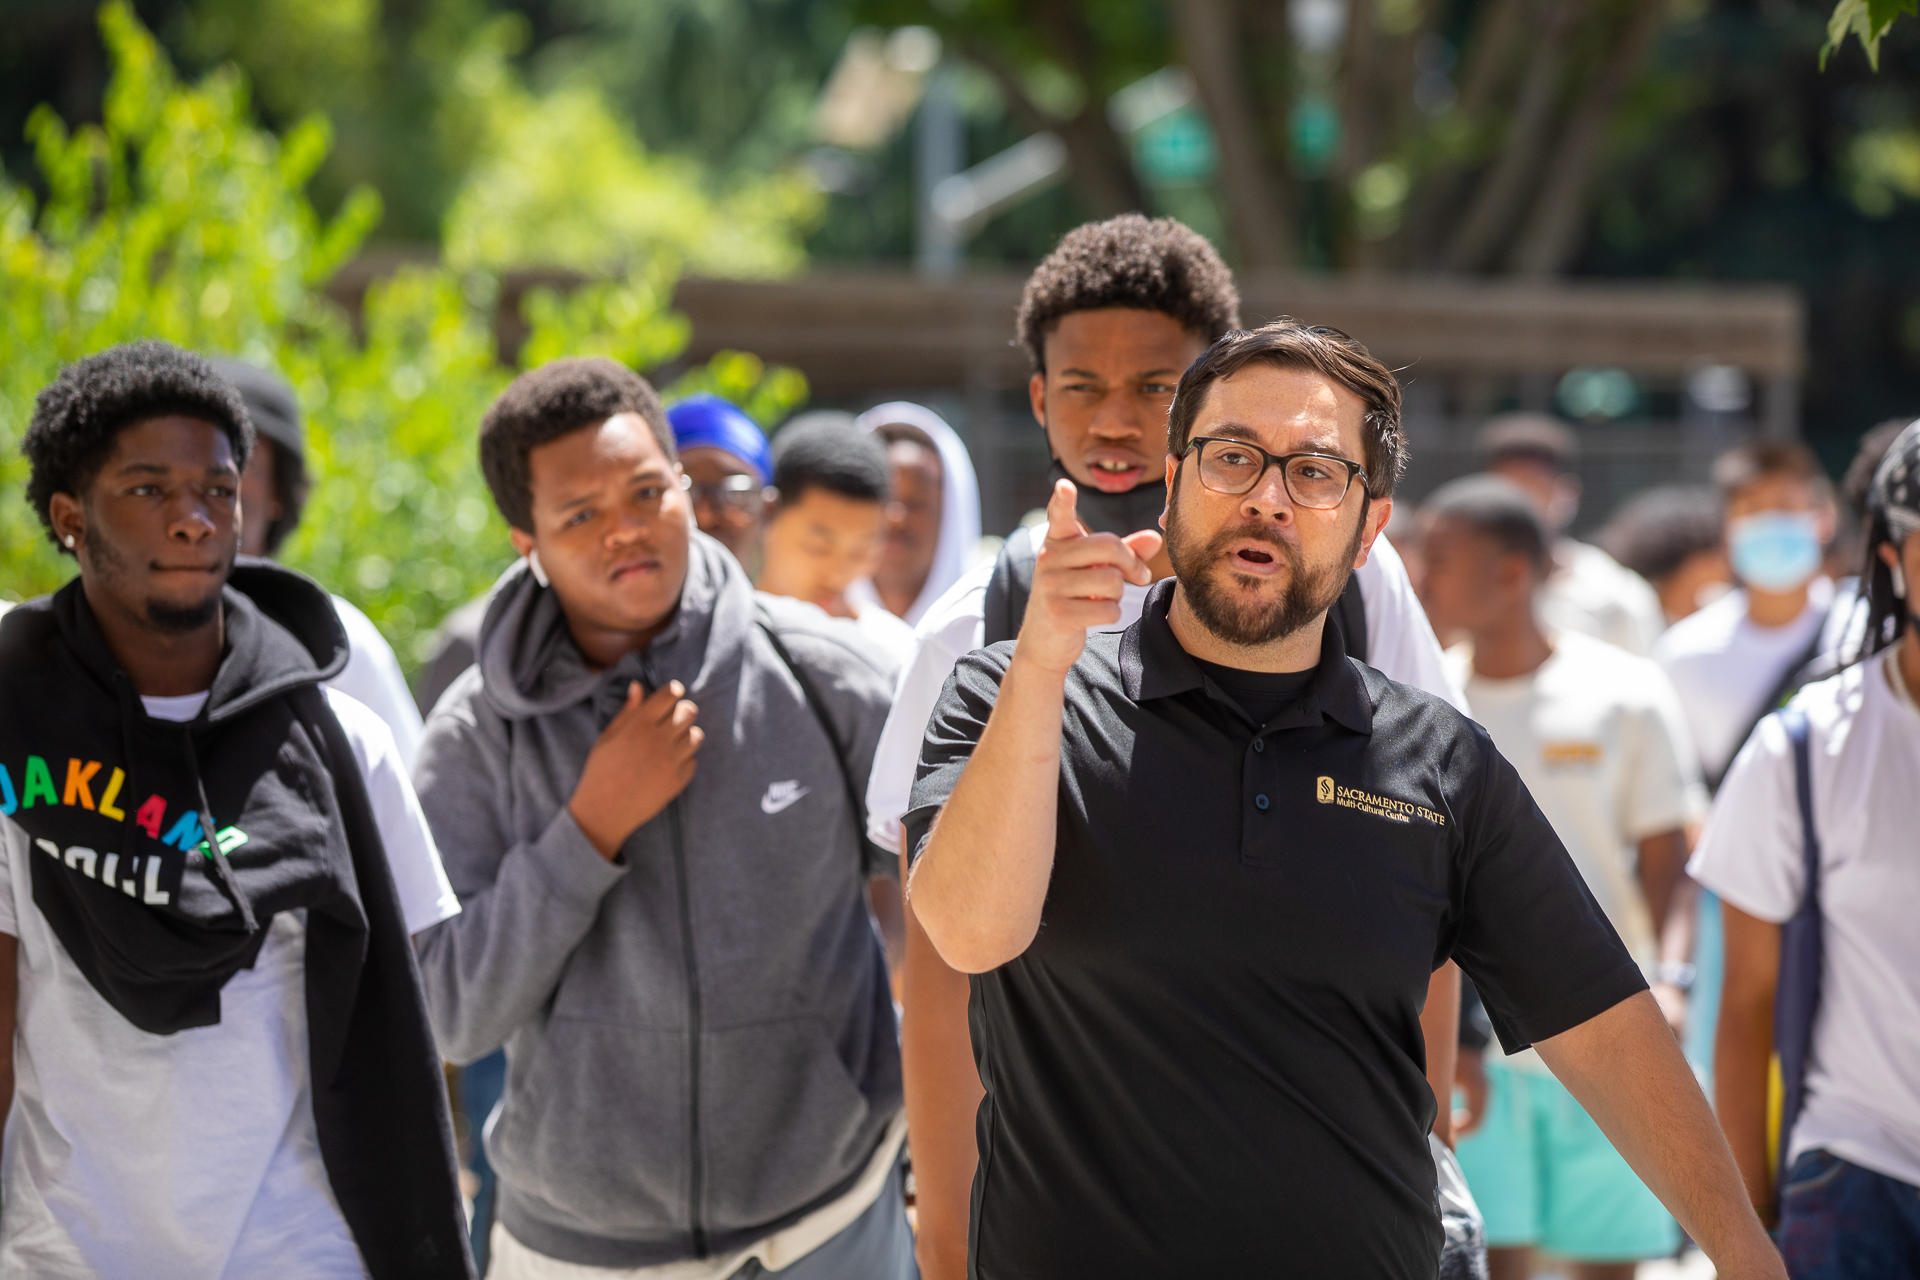 Erik Ramirez, outdoors, pointing as he walks, leading a group of Oakland High School students.